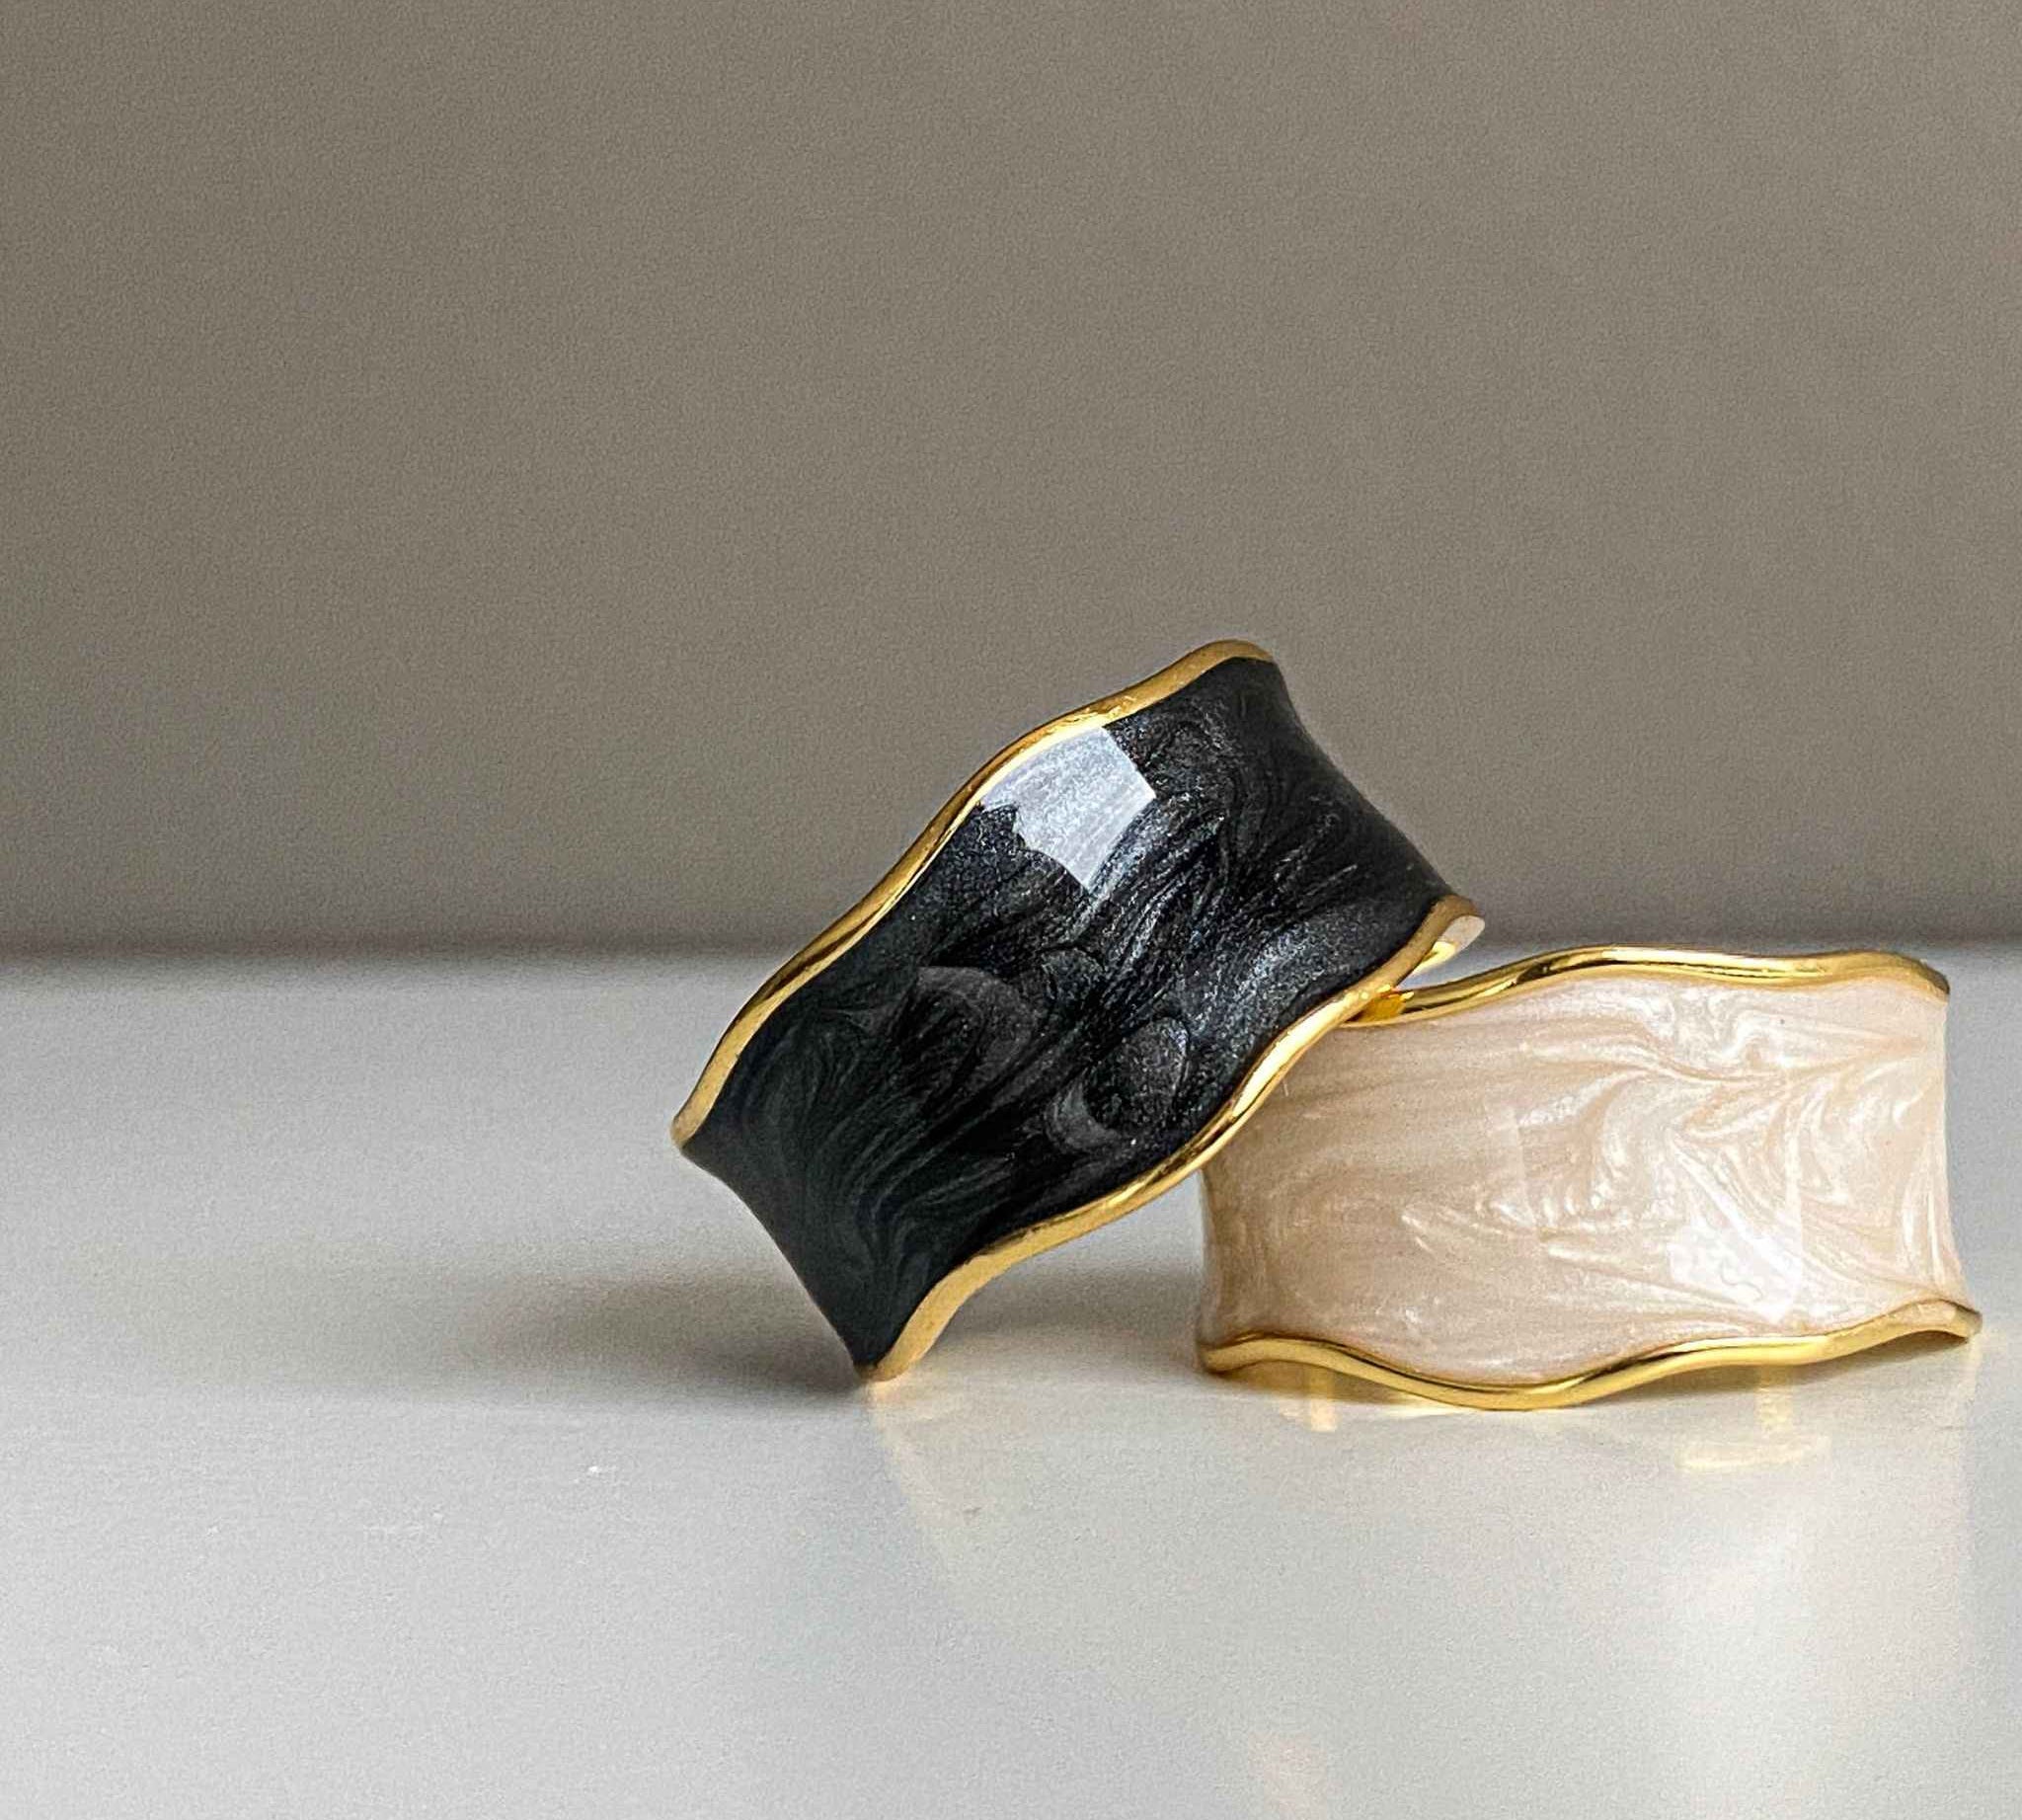 Close-up view of the white enamel swirl design on the gold plated ring, along with the same ring in black.